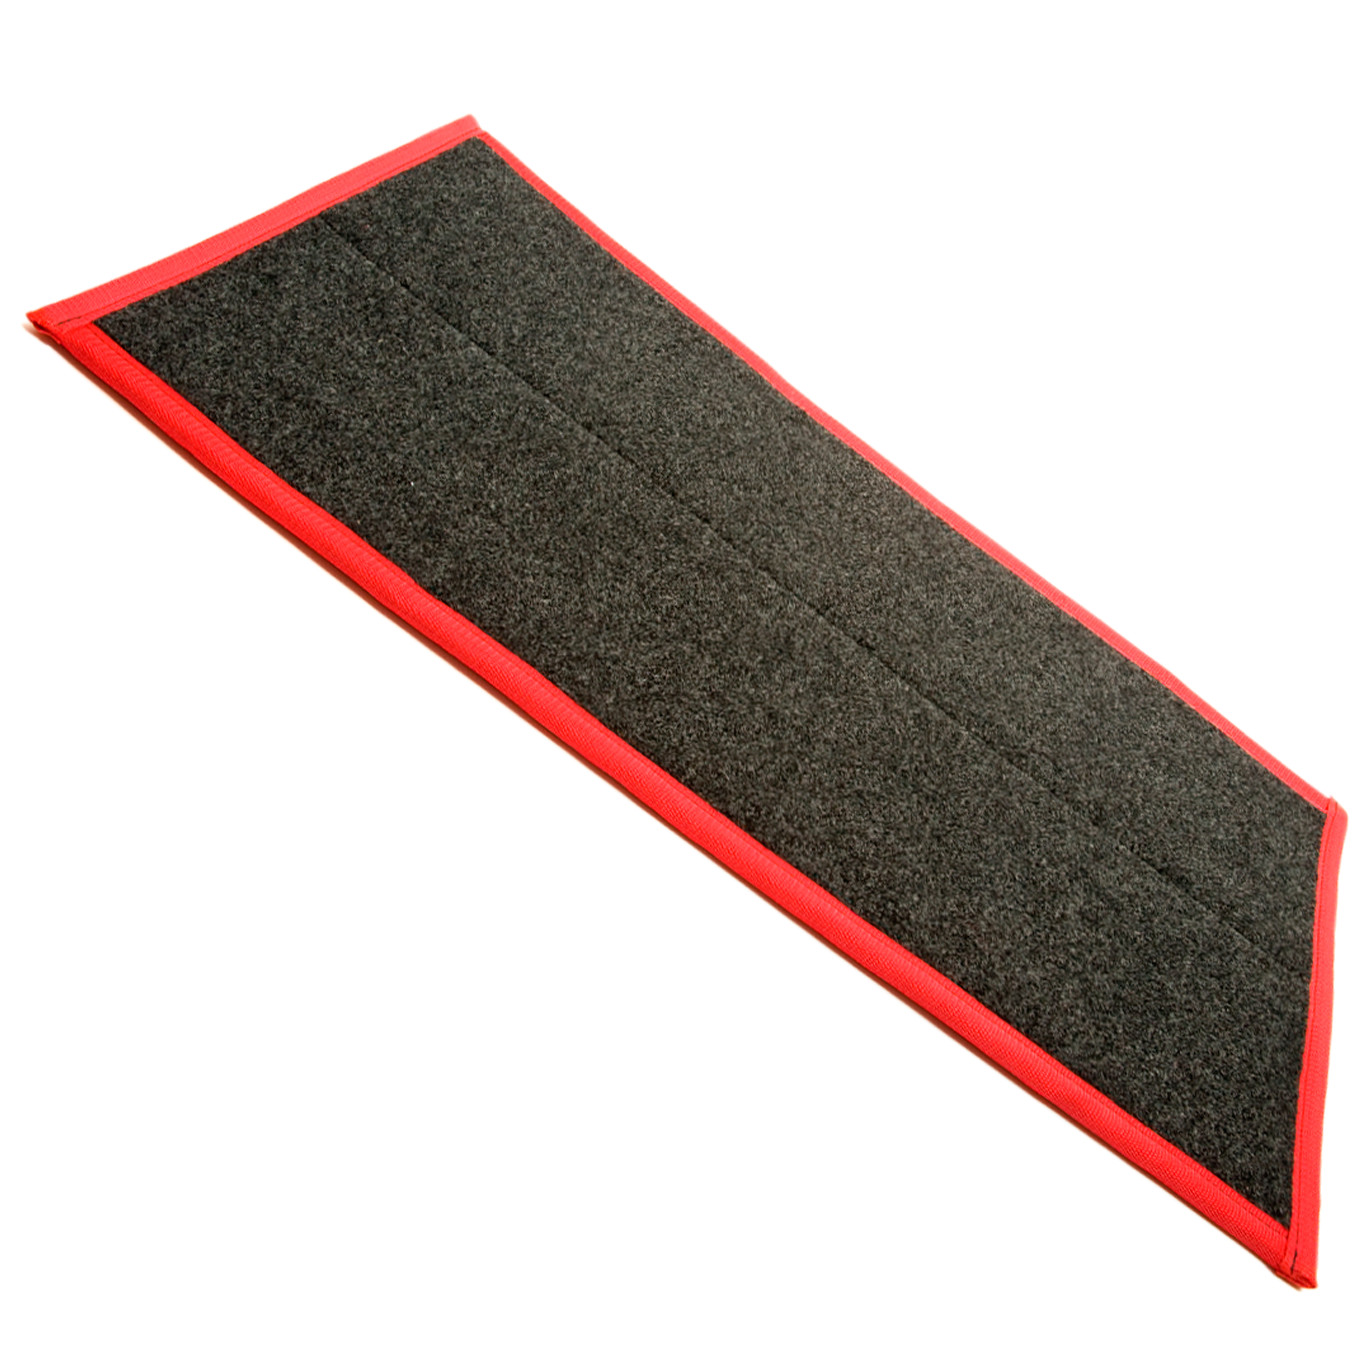 Detail view for PureTrack Replacement Pad with Red Trim. Disinfecting Shoe Mat System.